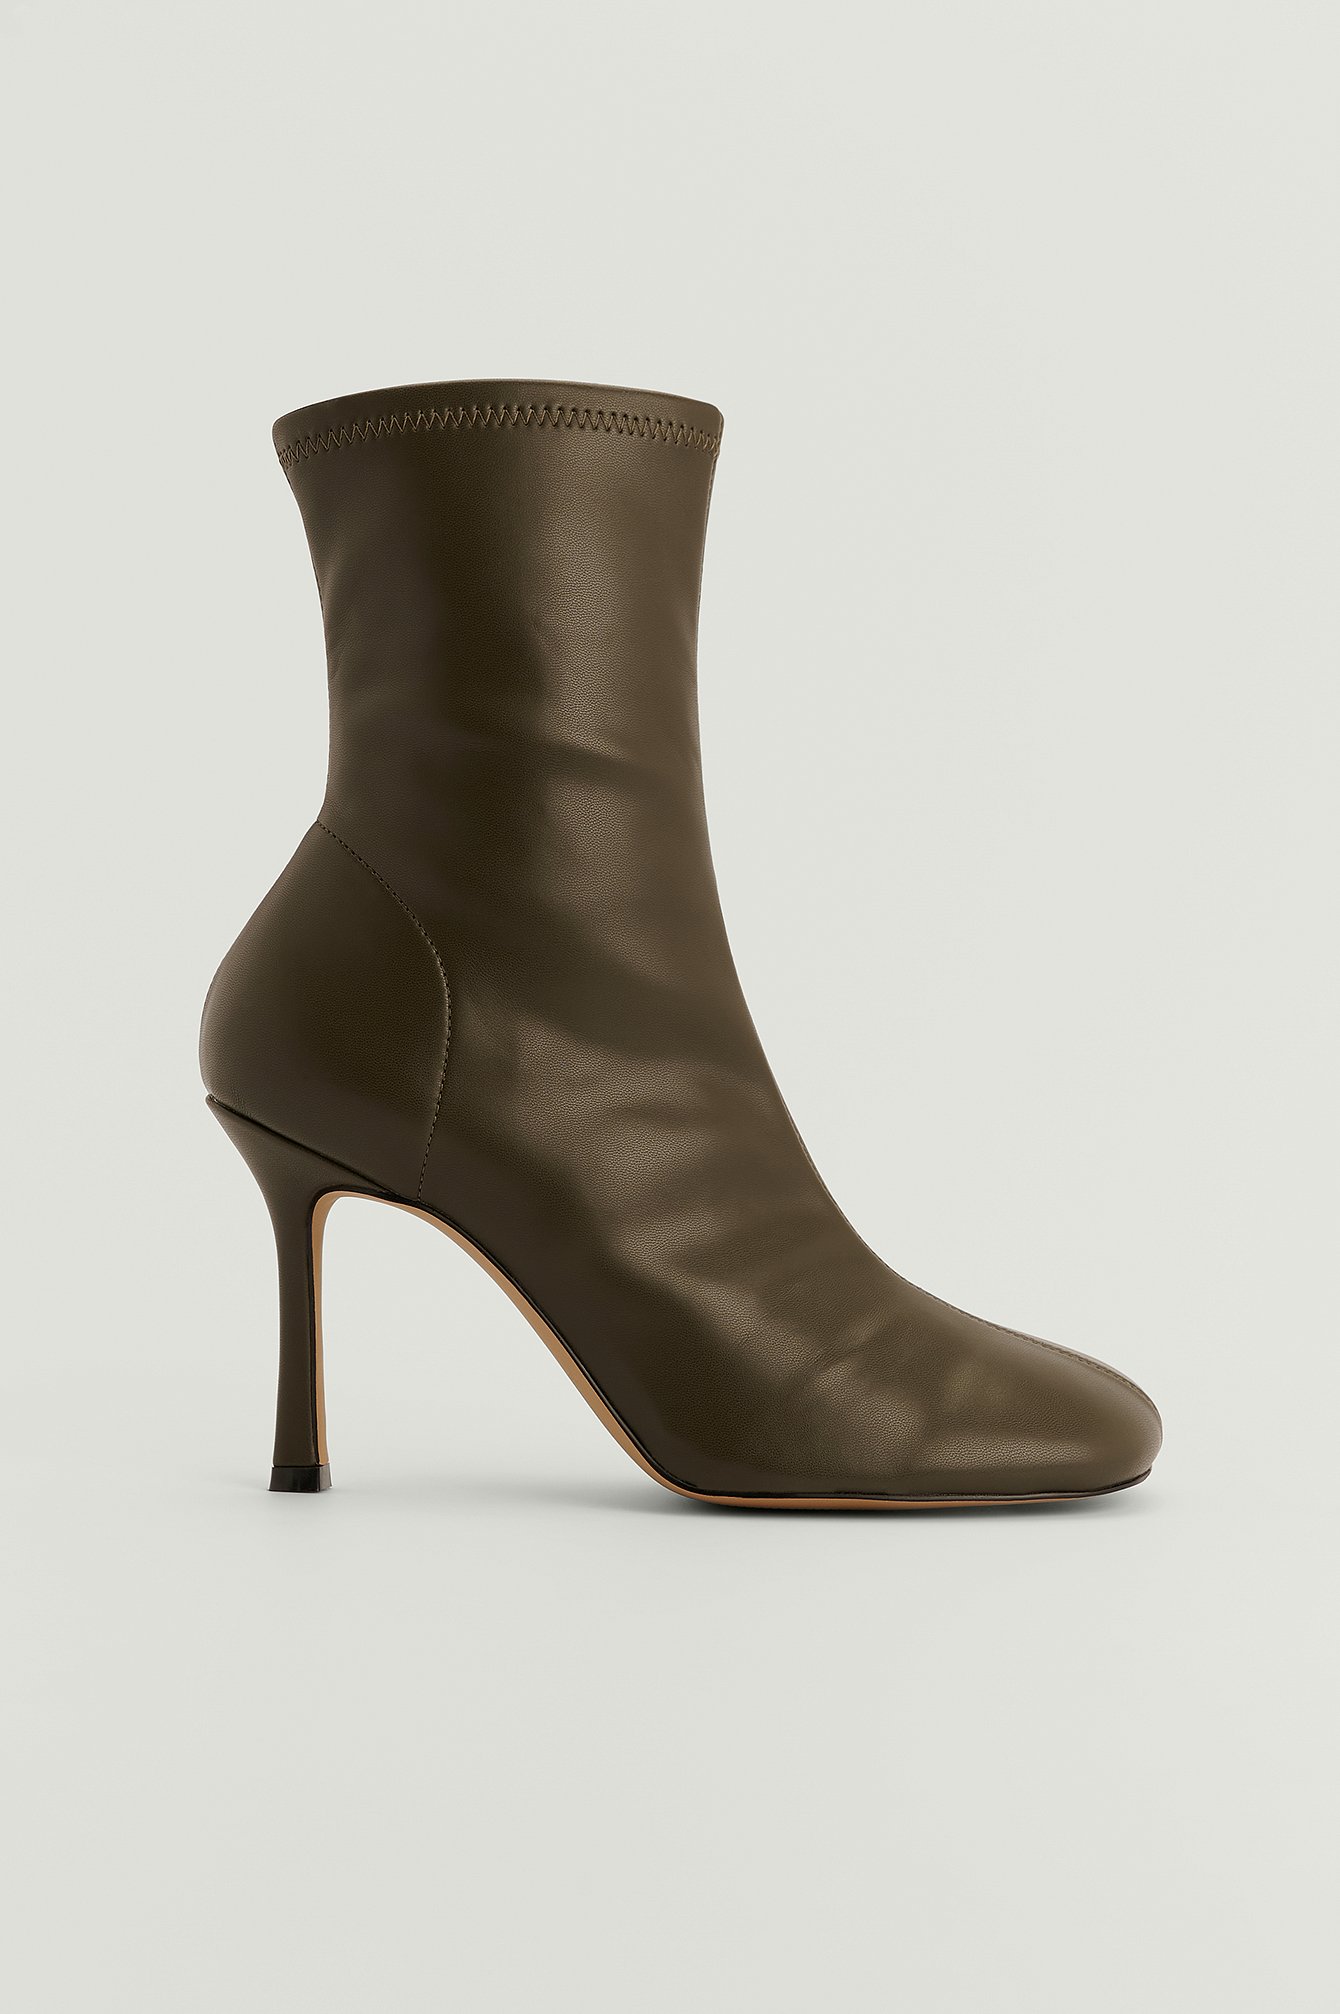 Deep Khaki Rounded Toe Ankle Boots